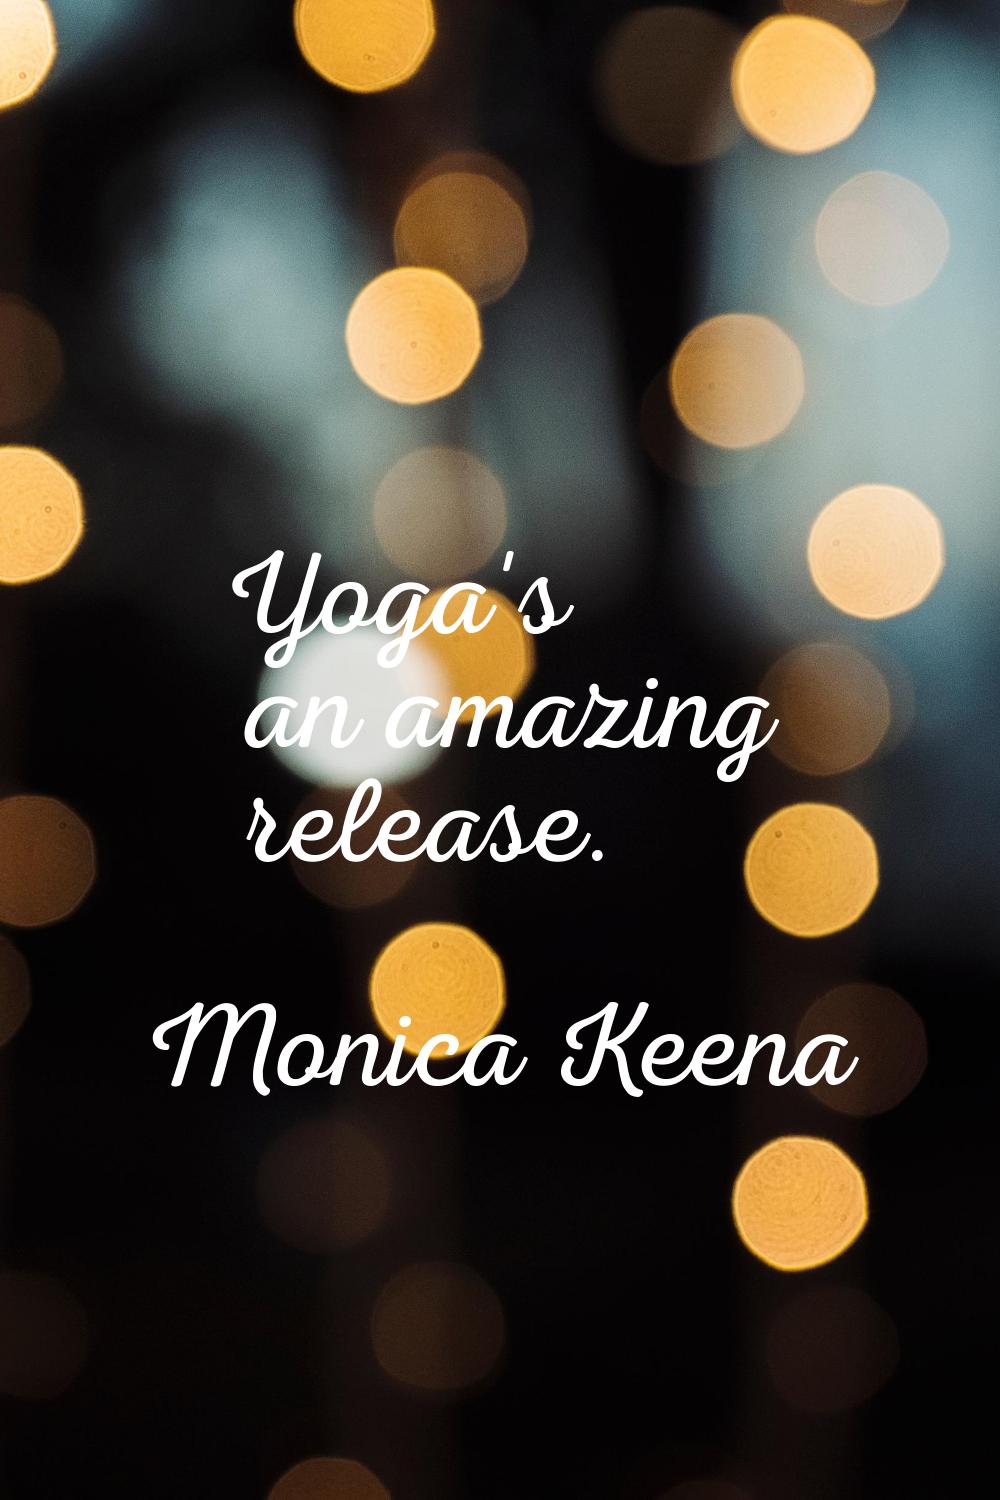 Yoga's an amazing release.